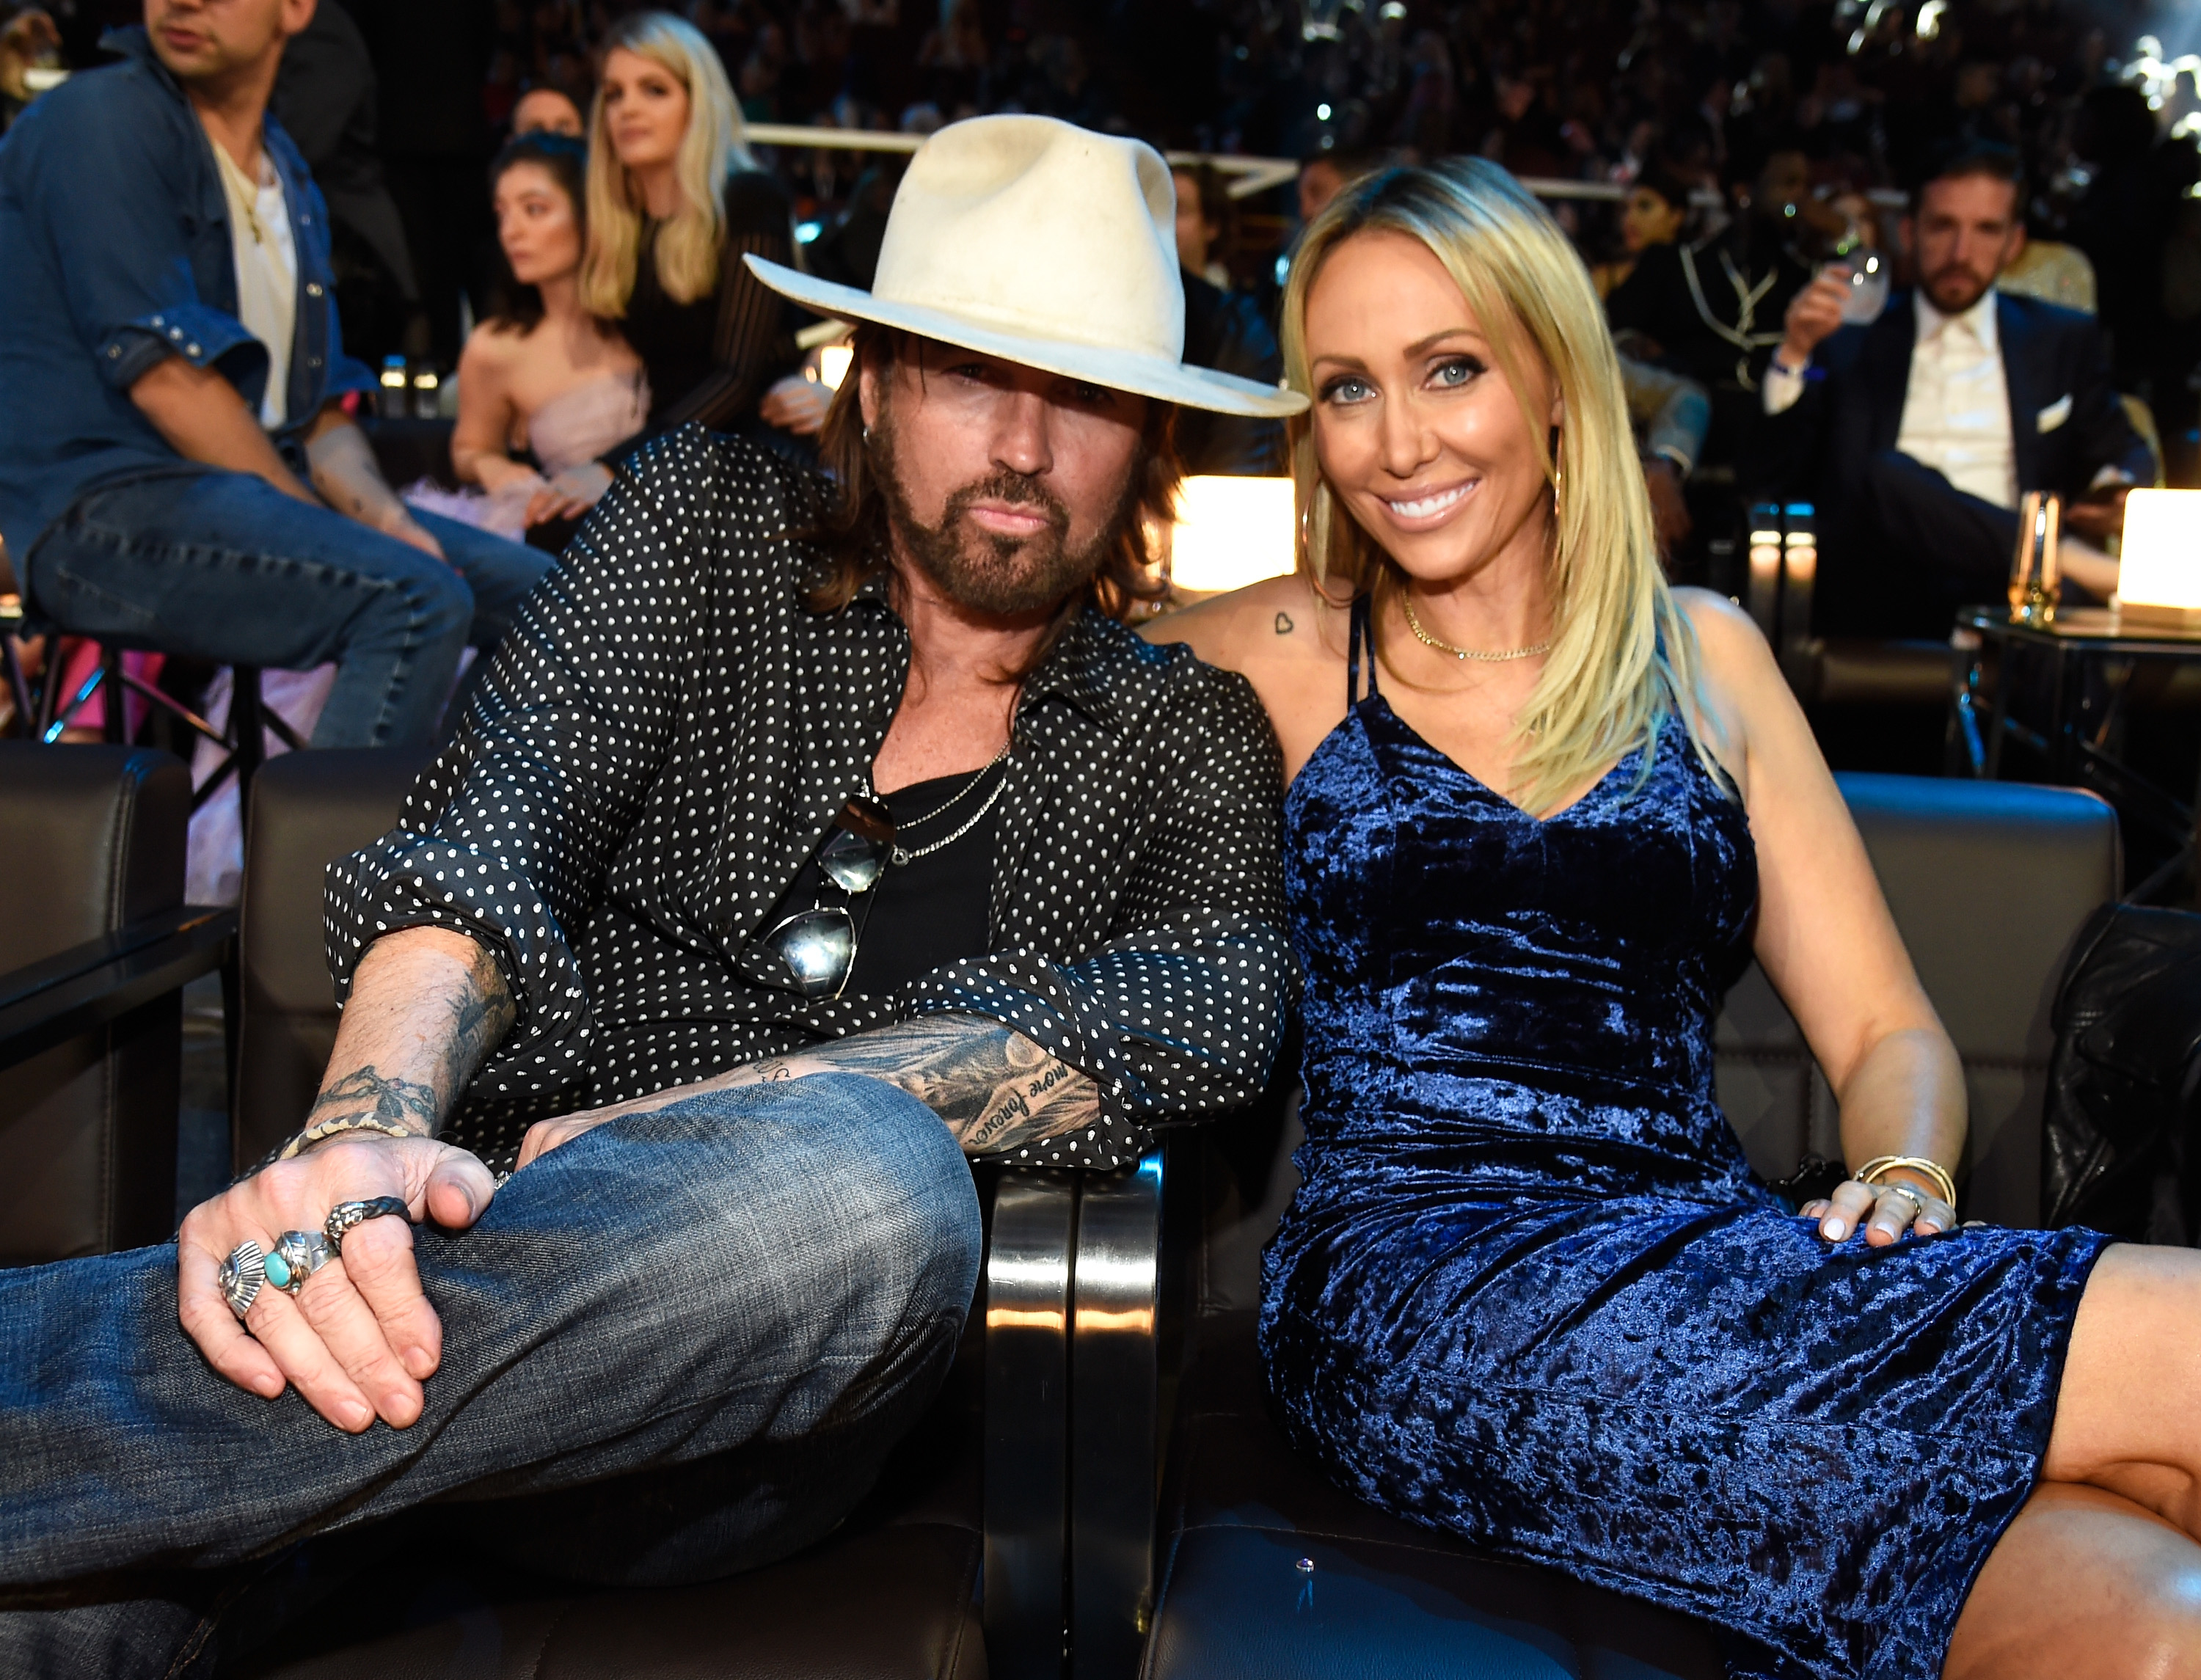 Billy Ray and Tish seated side by side at an event, dressed in smart casual attire